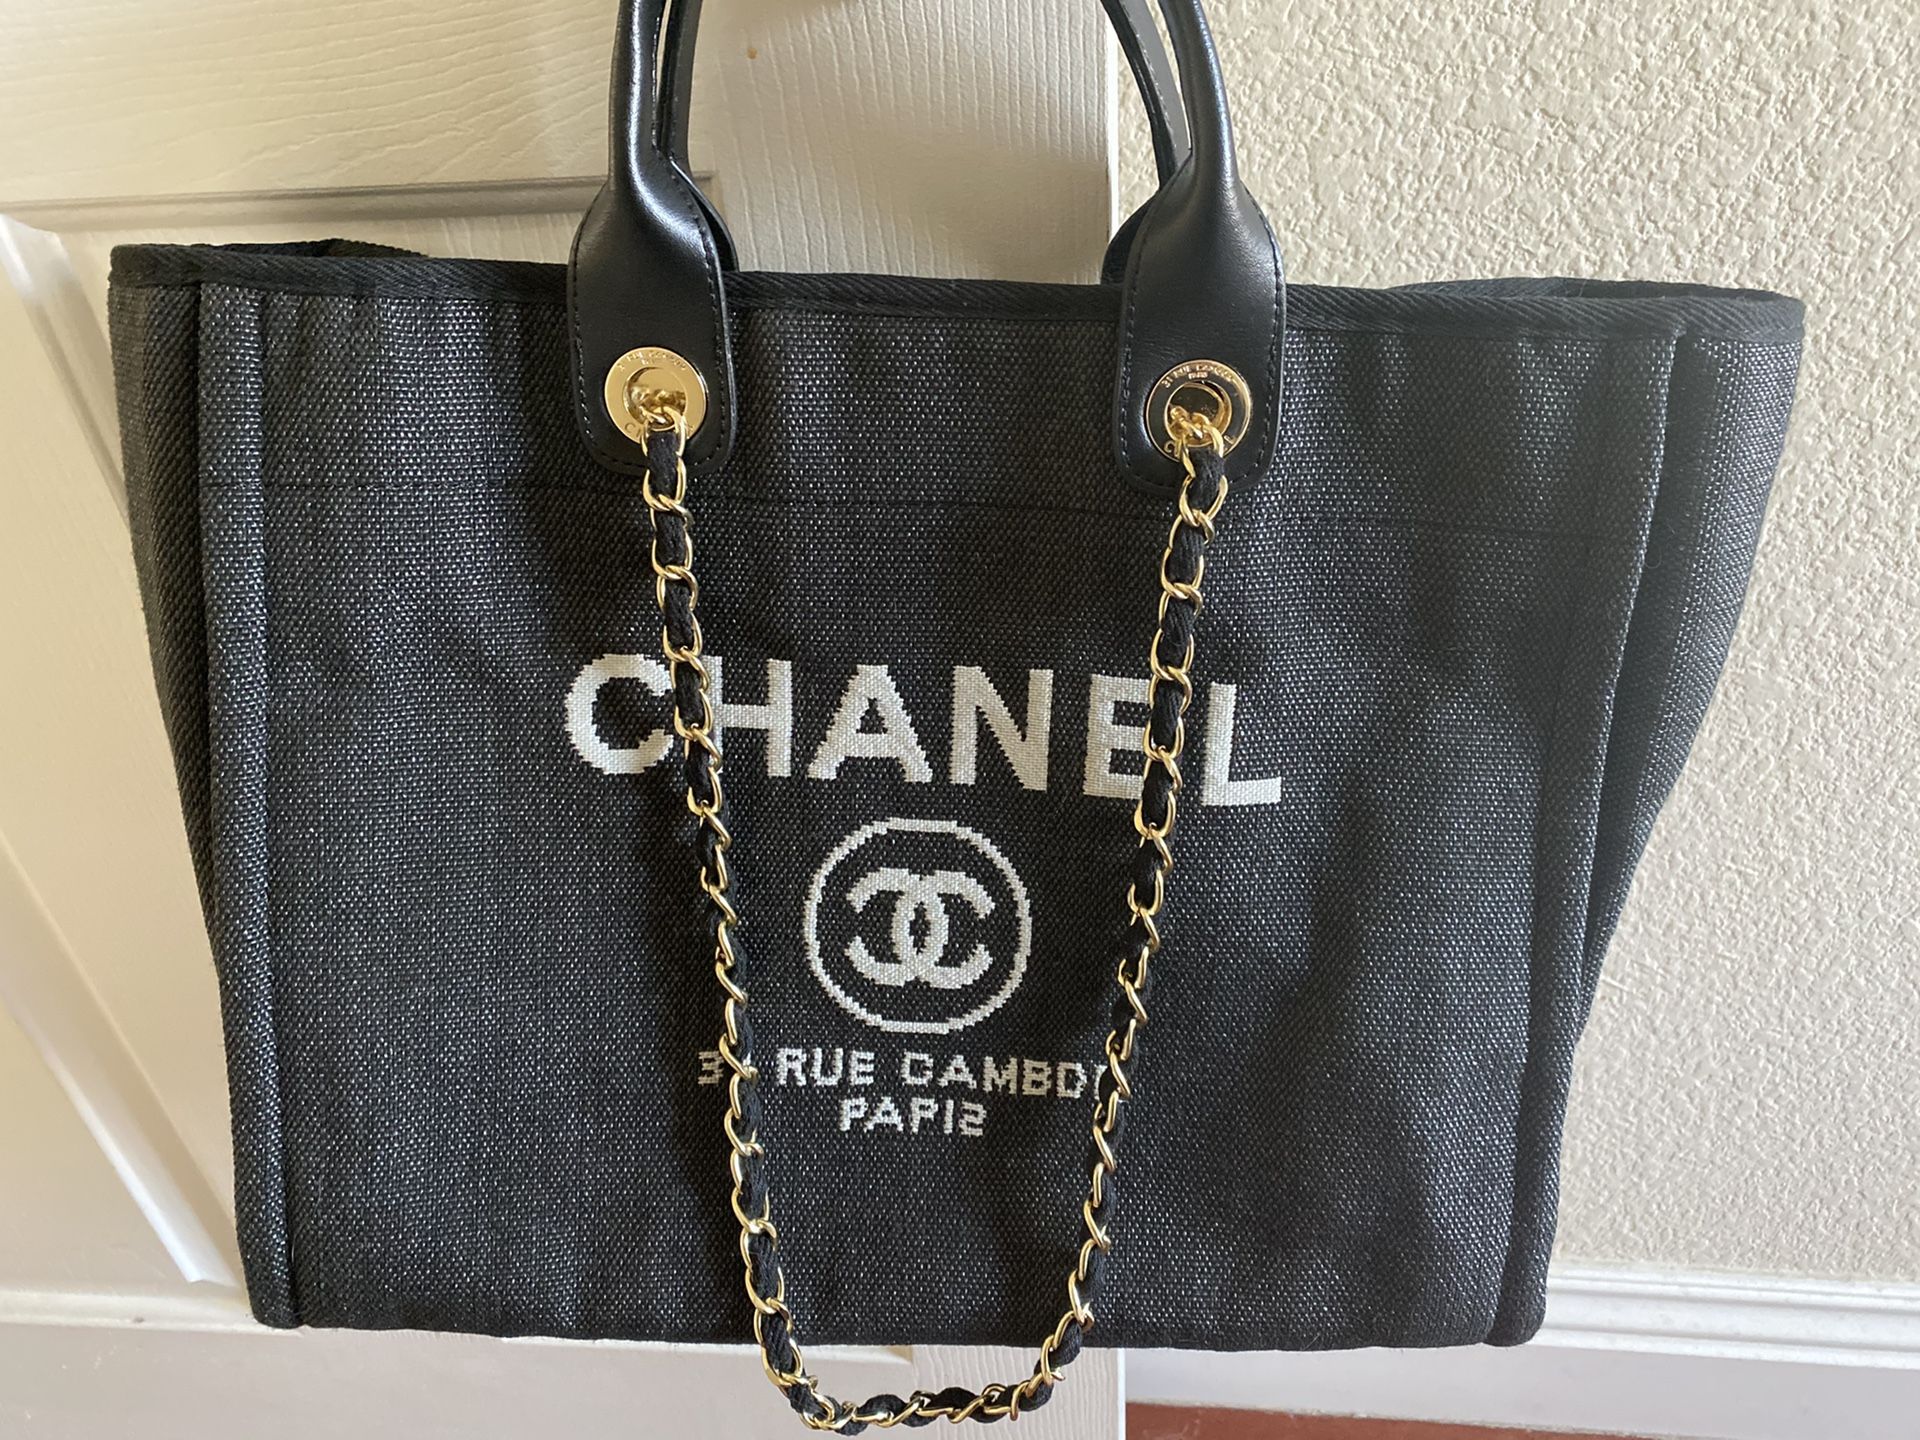 Brand new unused black luxury shopping bag w gold chains, says PAPI2 instead of Paris